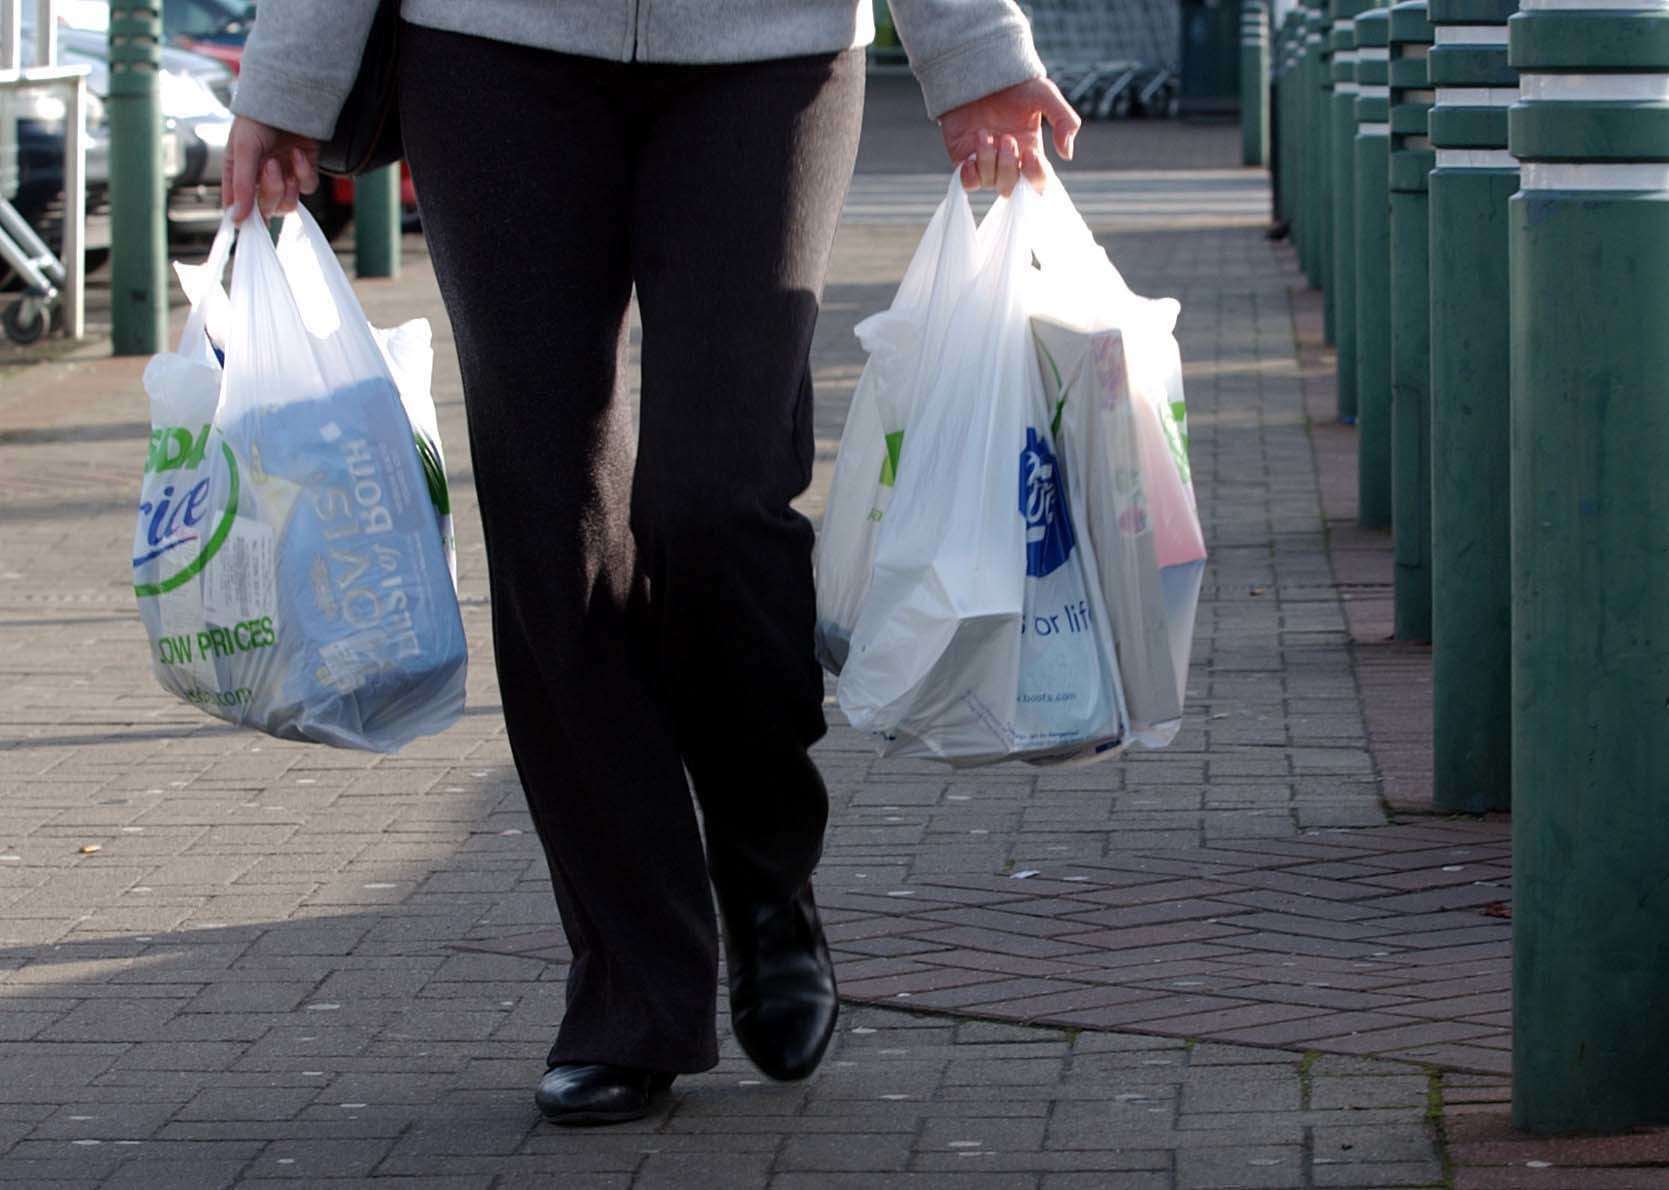 Supermarkets could provide a system of rescue, it was suggested (David Jones/PA)